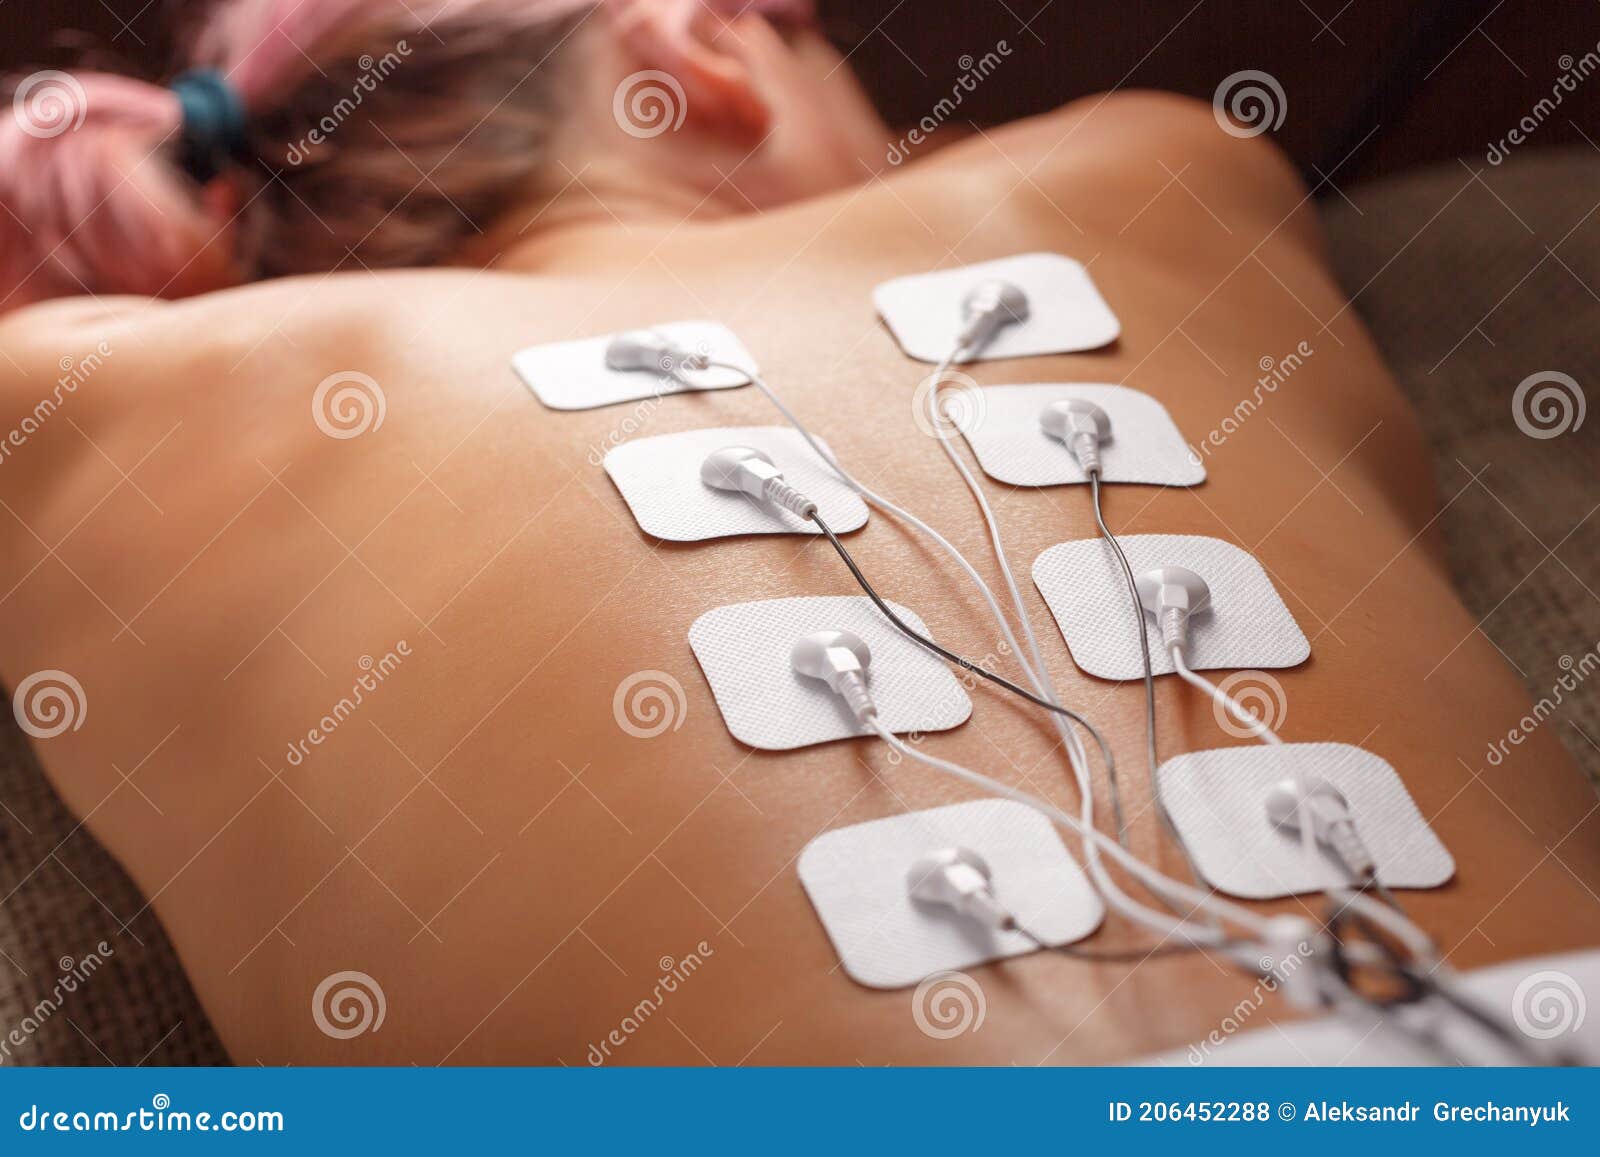 Muscle Stimulator with Electrodes, BacBack and Shoulder Massage with a Muscle  Stimulator with Attached Electrodes Along Stock Photo - Image of luxury,  electric: 206309420